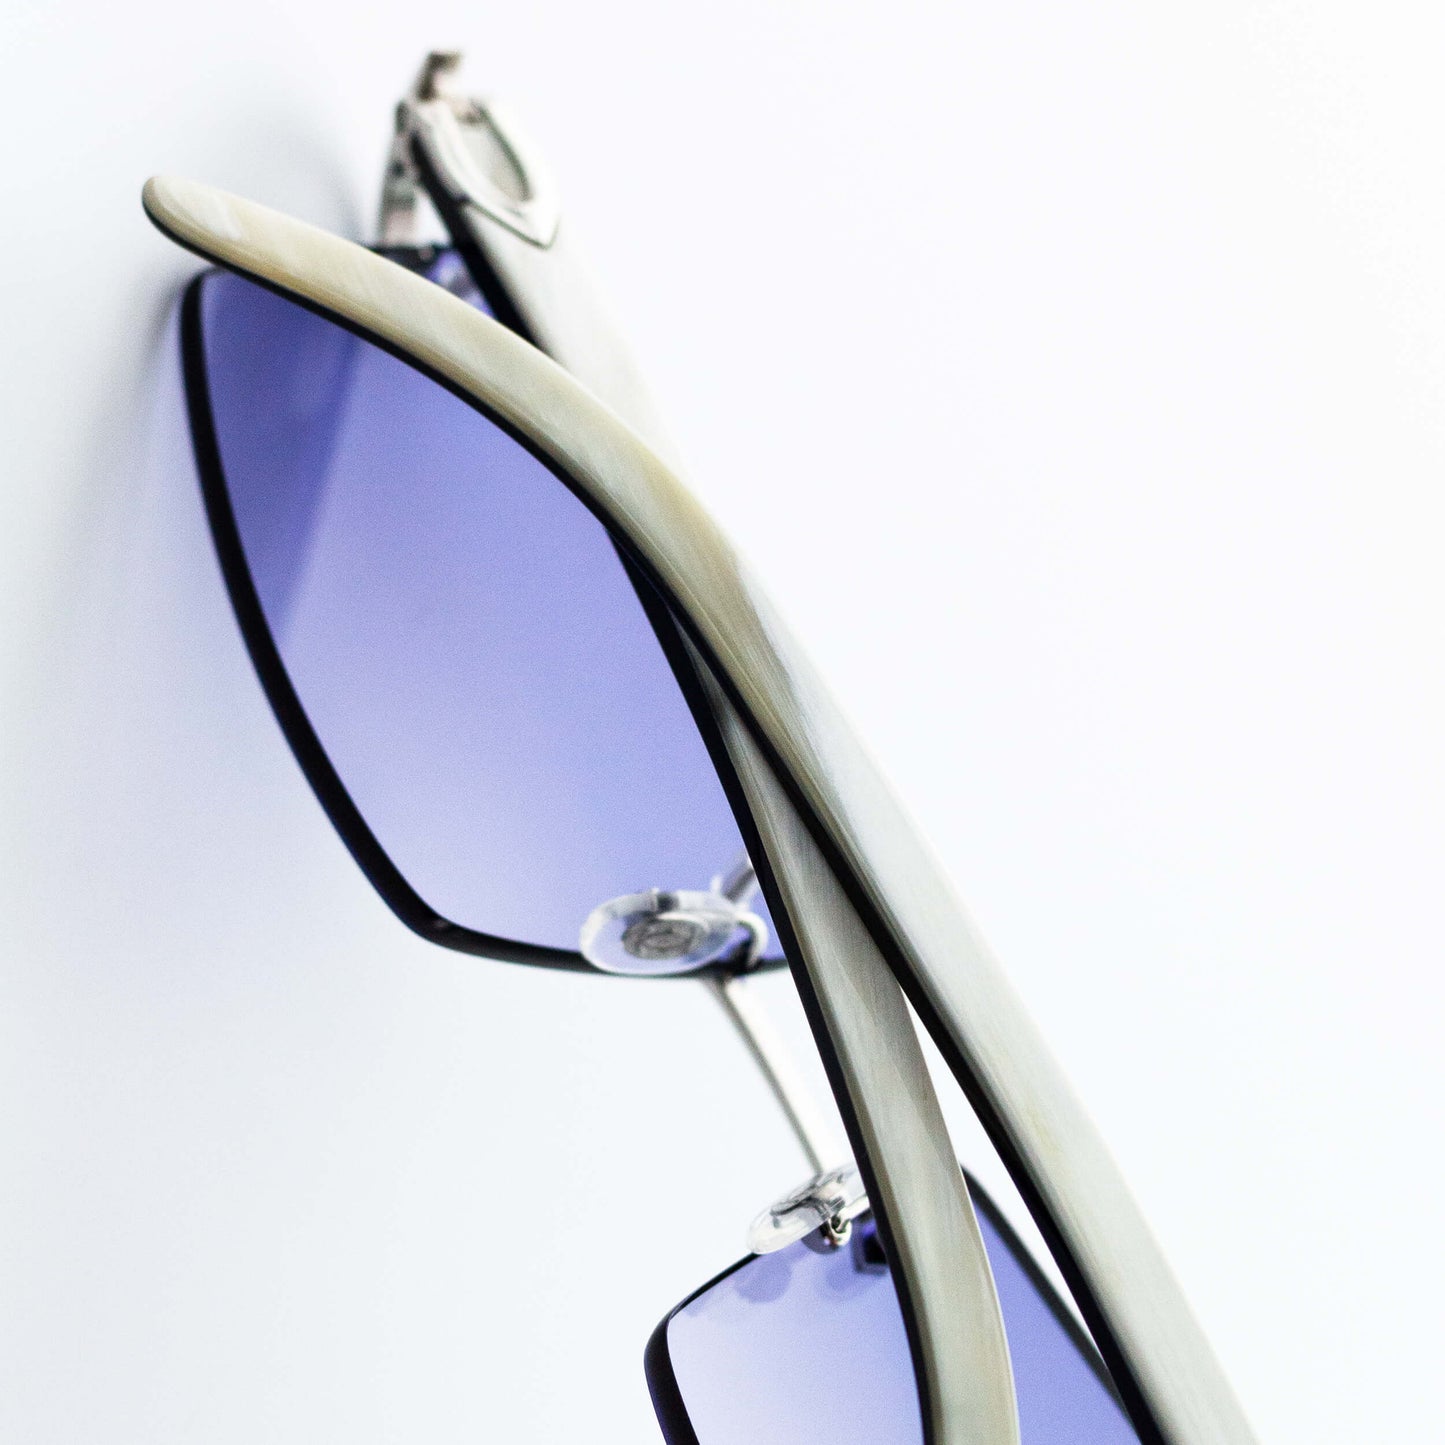 Cartier White Horn Glasses with Platinum Detail & Smoke Purple Lens CT0046O-002